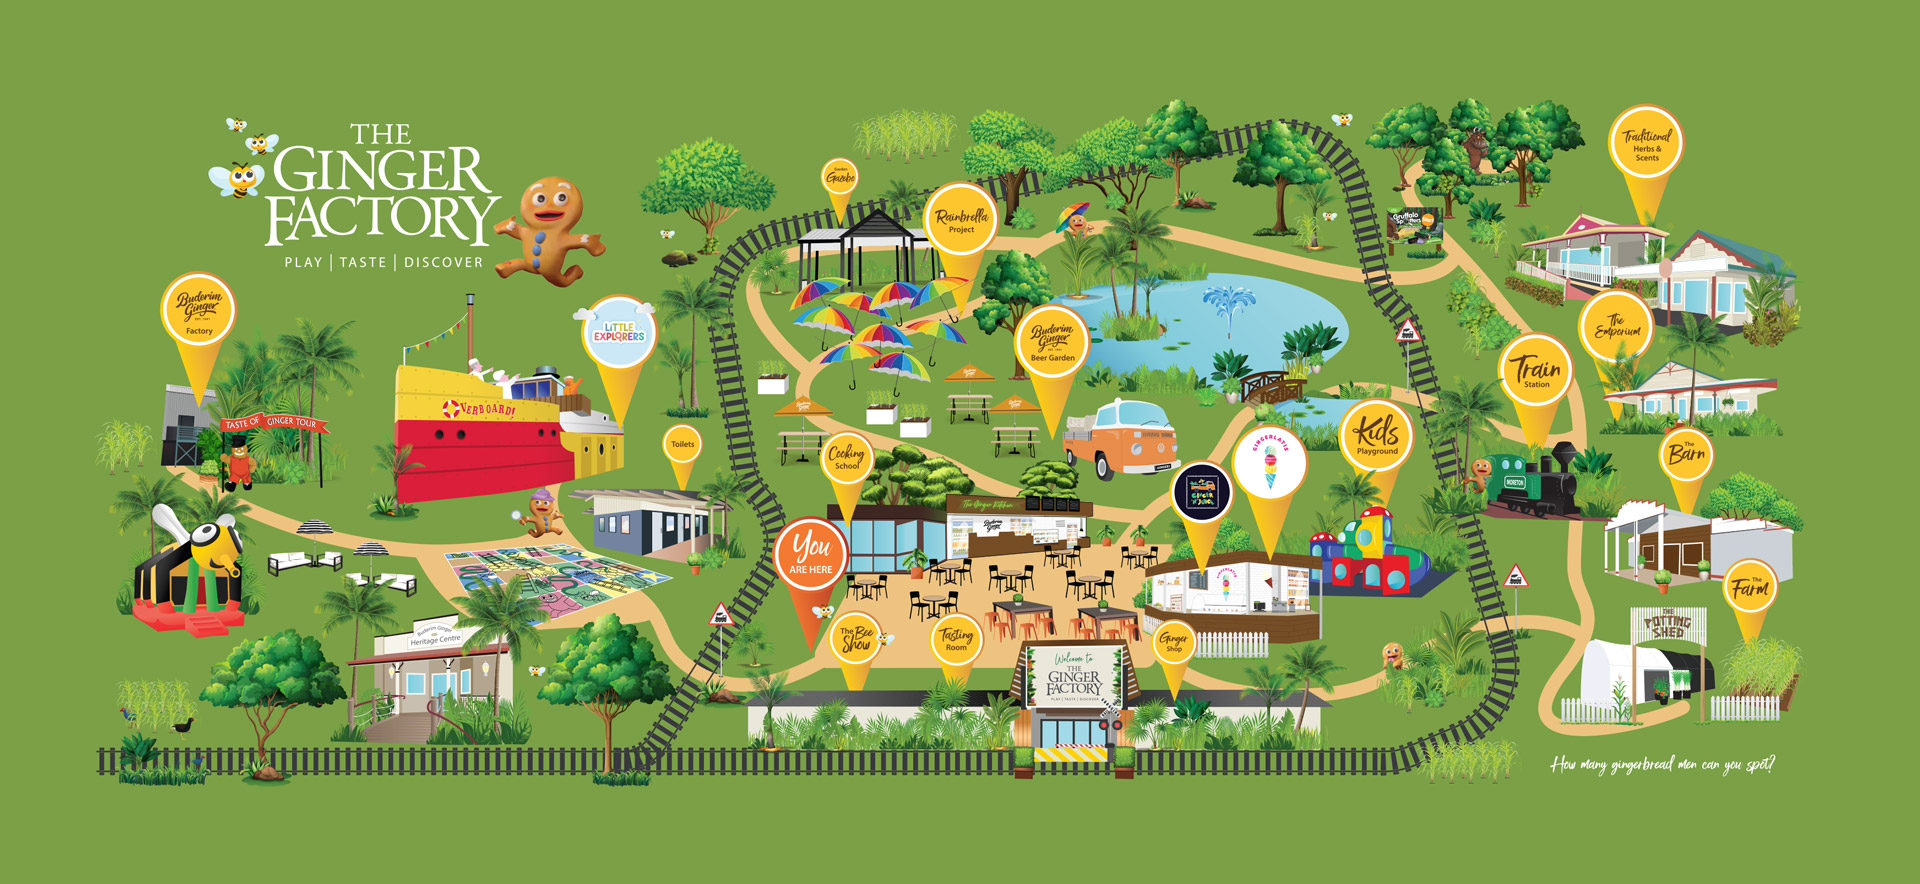 Ginger Factory Map Of Park 2